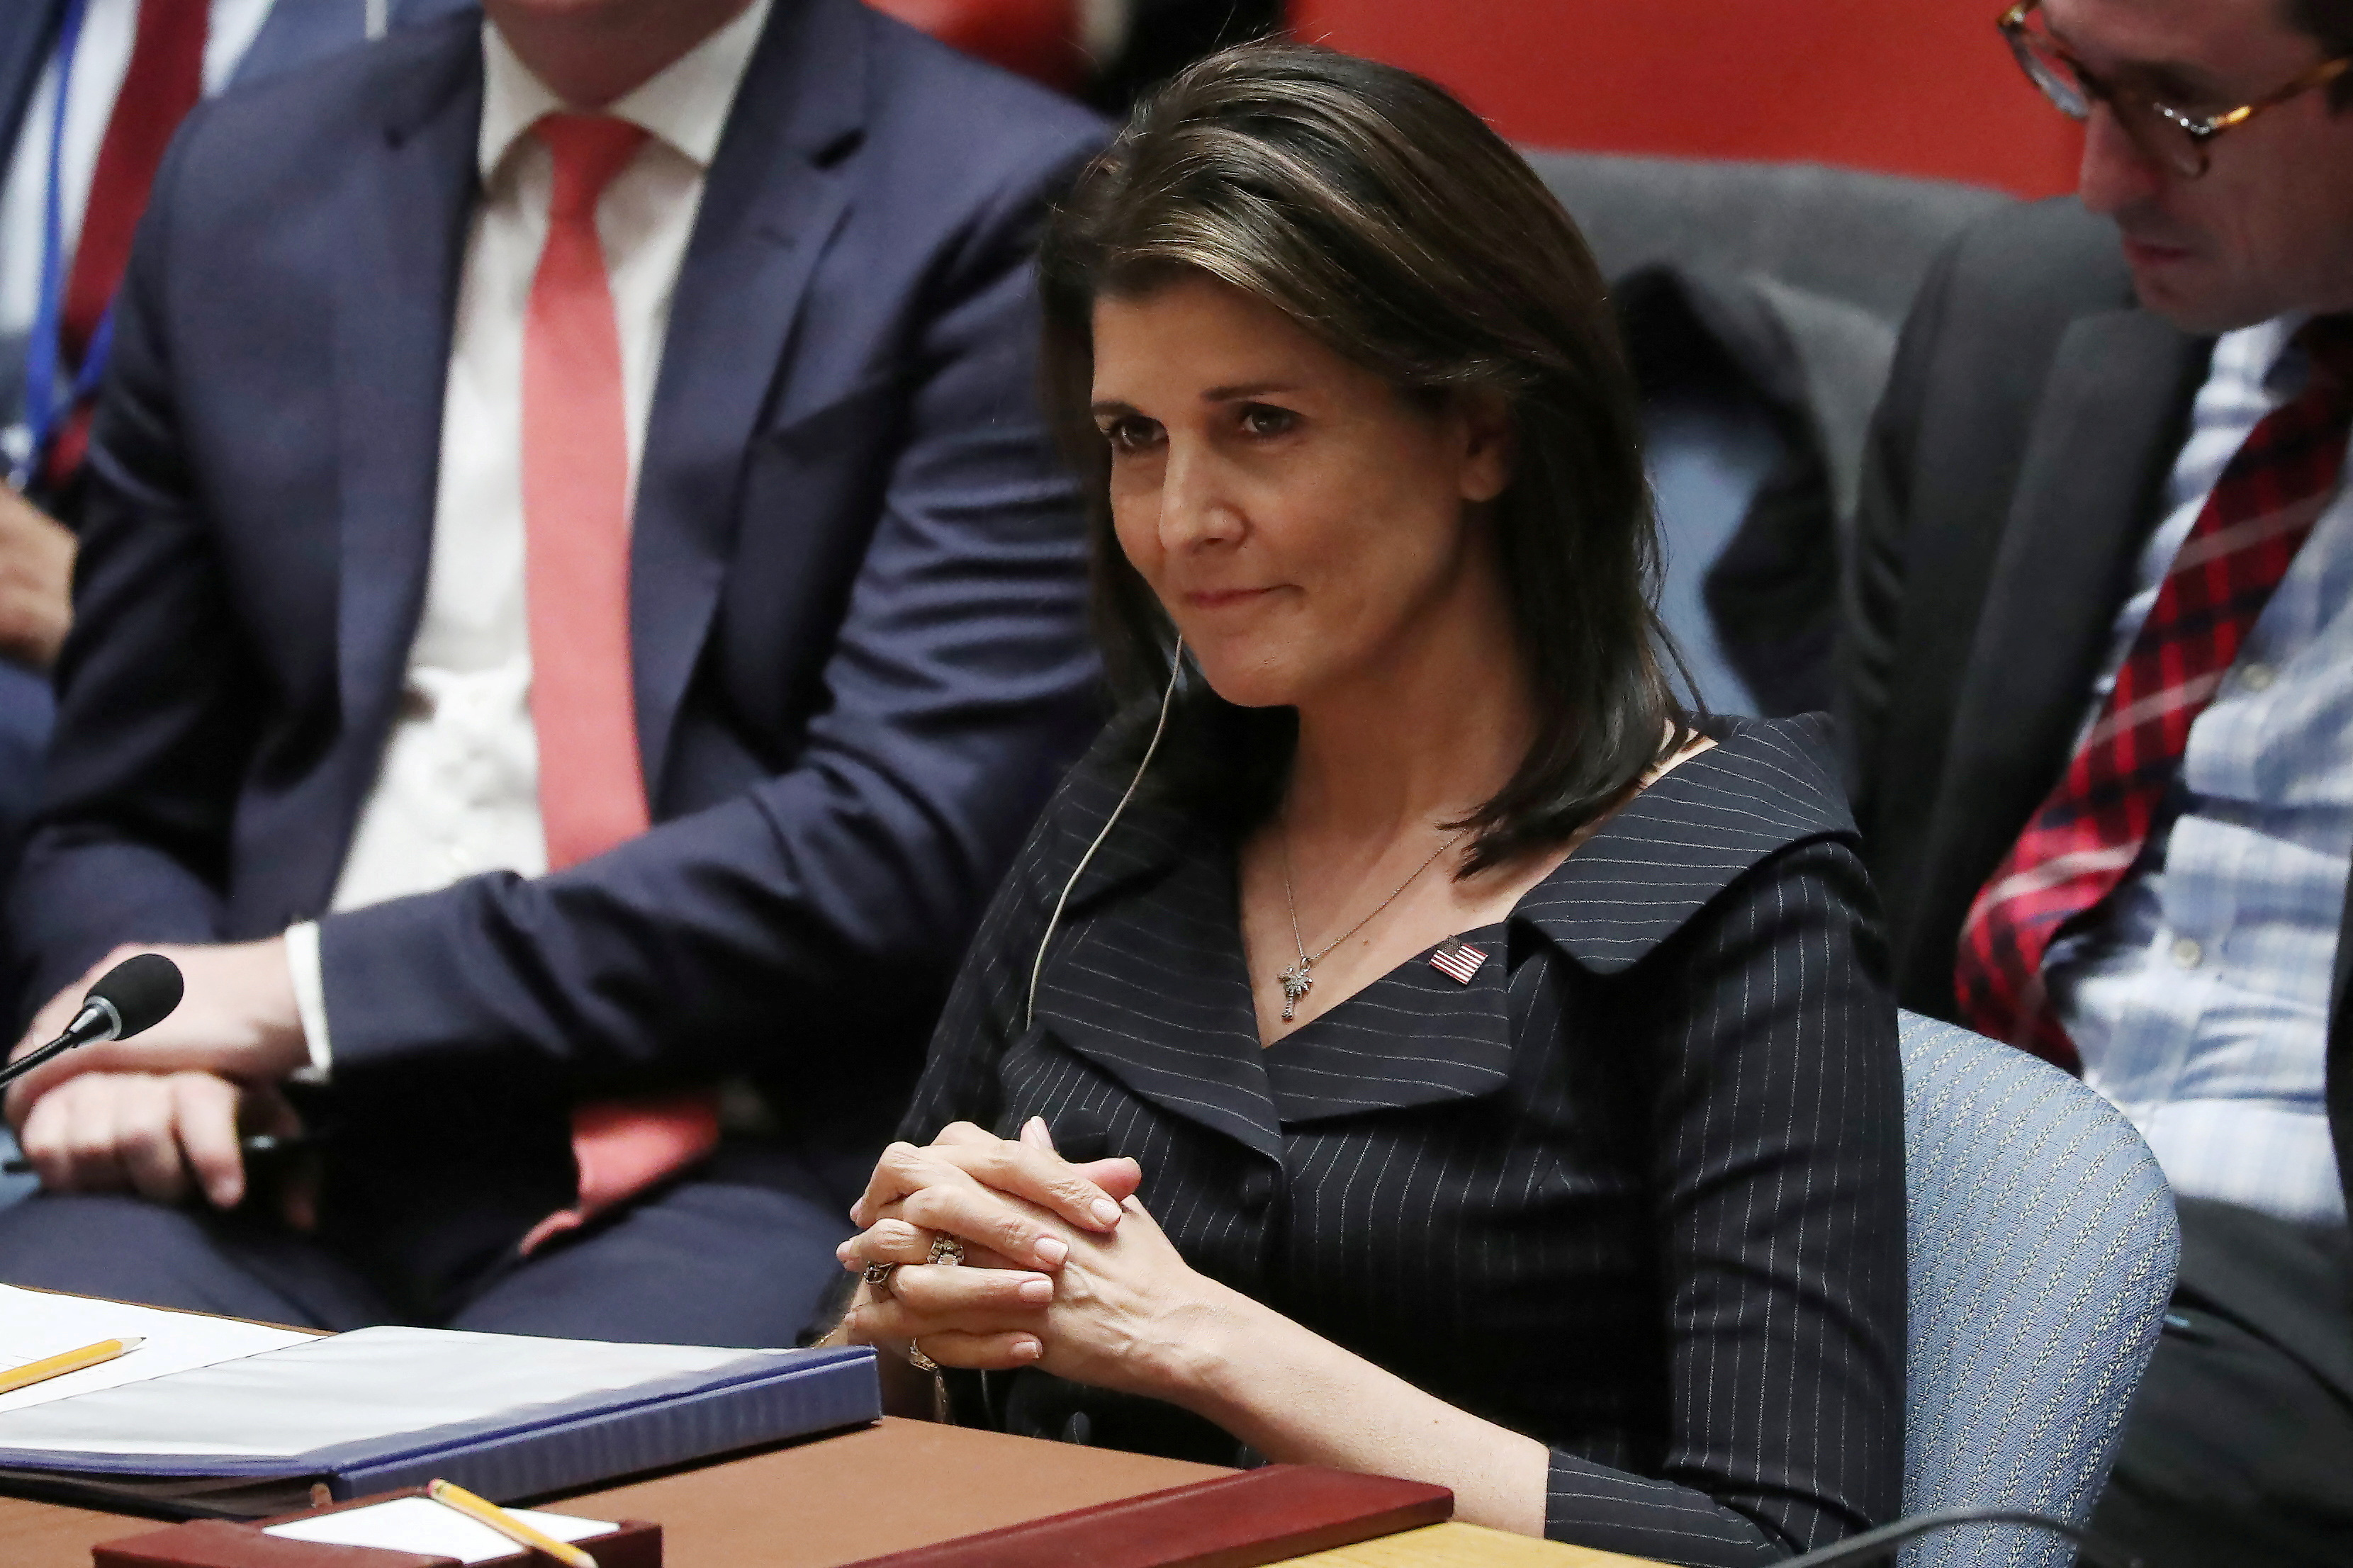 U.S. Ambassador to UN Haley listens to a speaker during a U.N. Security Council meeting on the Middle East at U.N. headquarters in New York